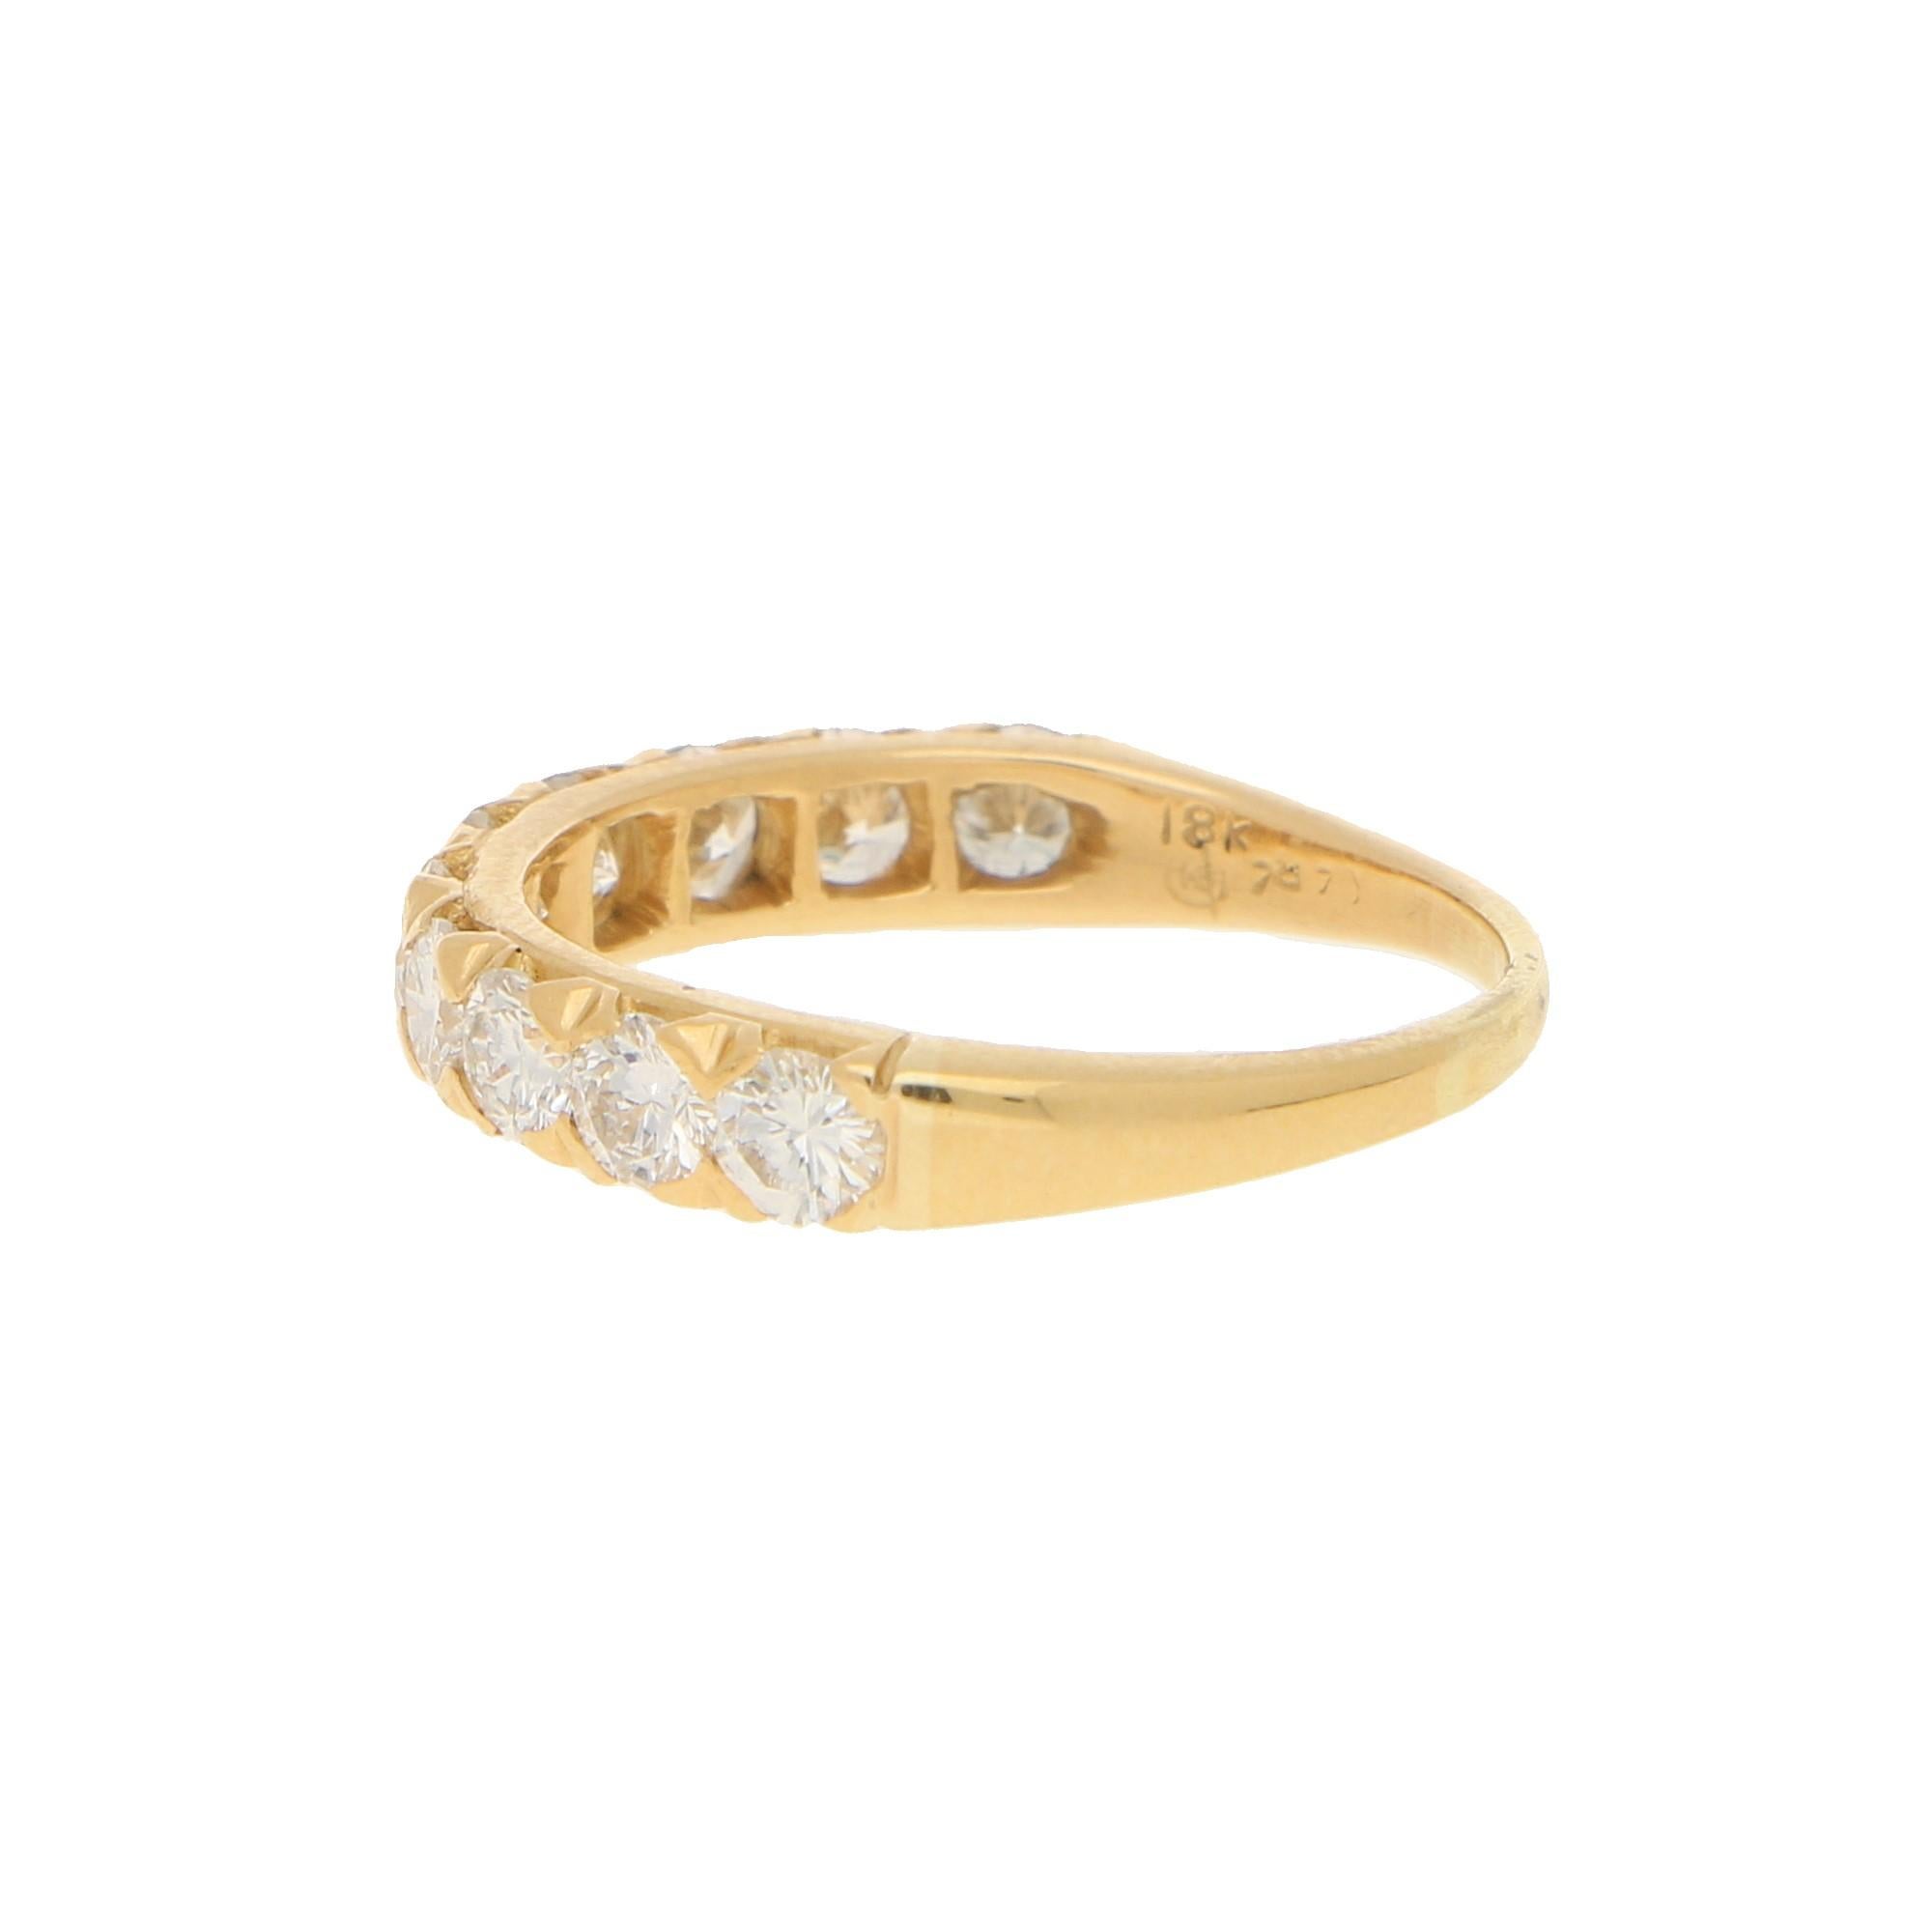 Diamonds approximately 1.30 carats in total, F/G colour, VS-SI clarity.
A vintage Oscar Heyman diamond half-eternity ring in 18-karat yellow gold. 
The ring features ten round brilliant-cut diamonds seamlessly shared-claw-set throughout the shank,